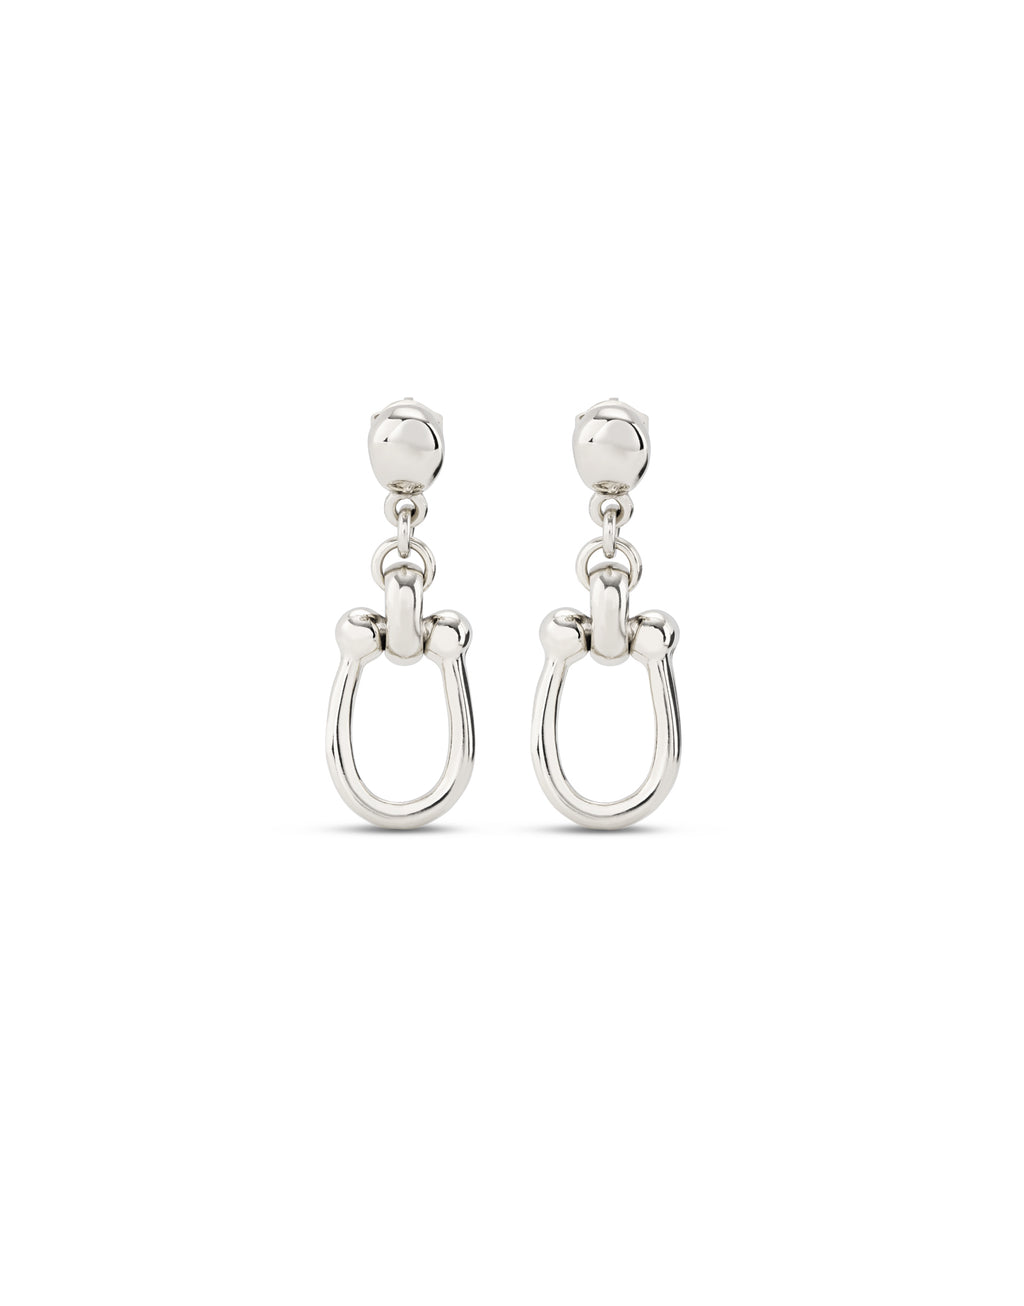 Silver-Plated Earrings With 1 Medium Sized Link